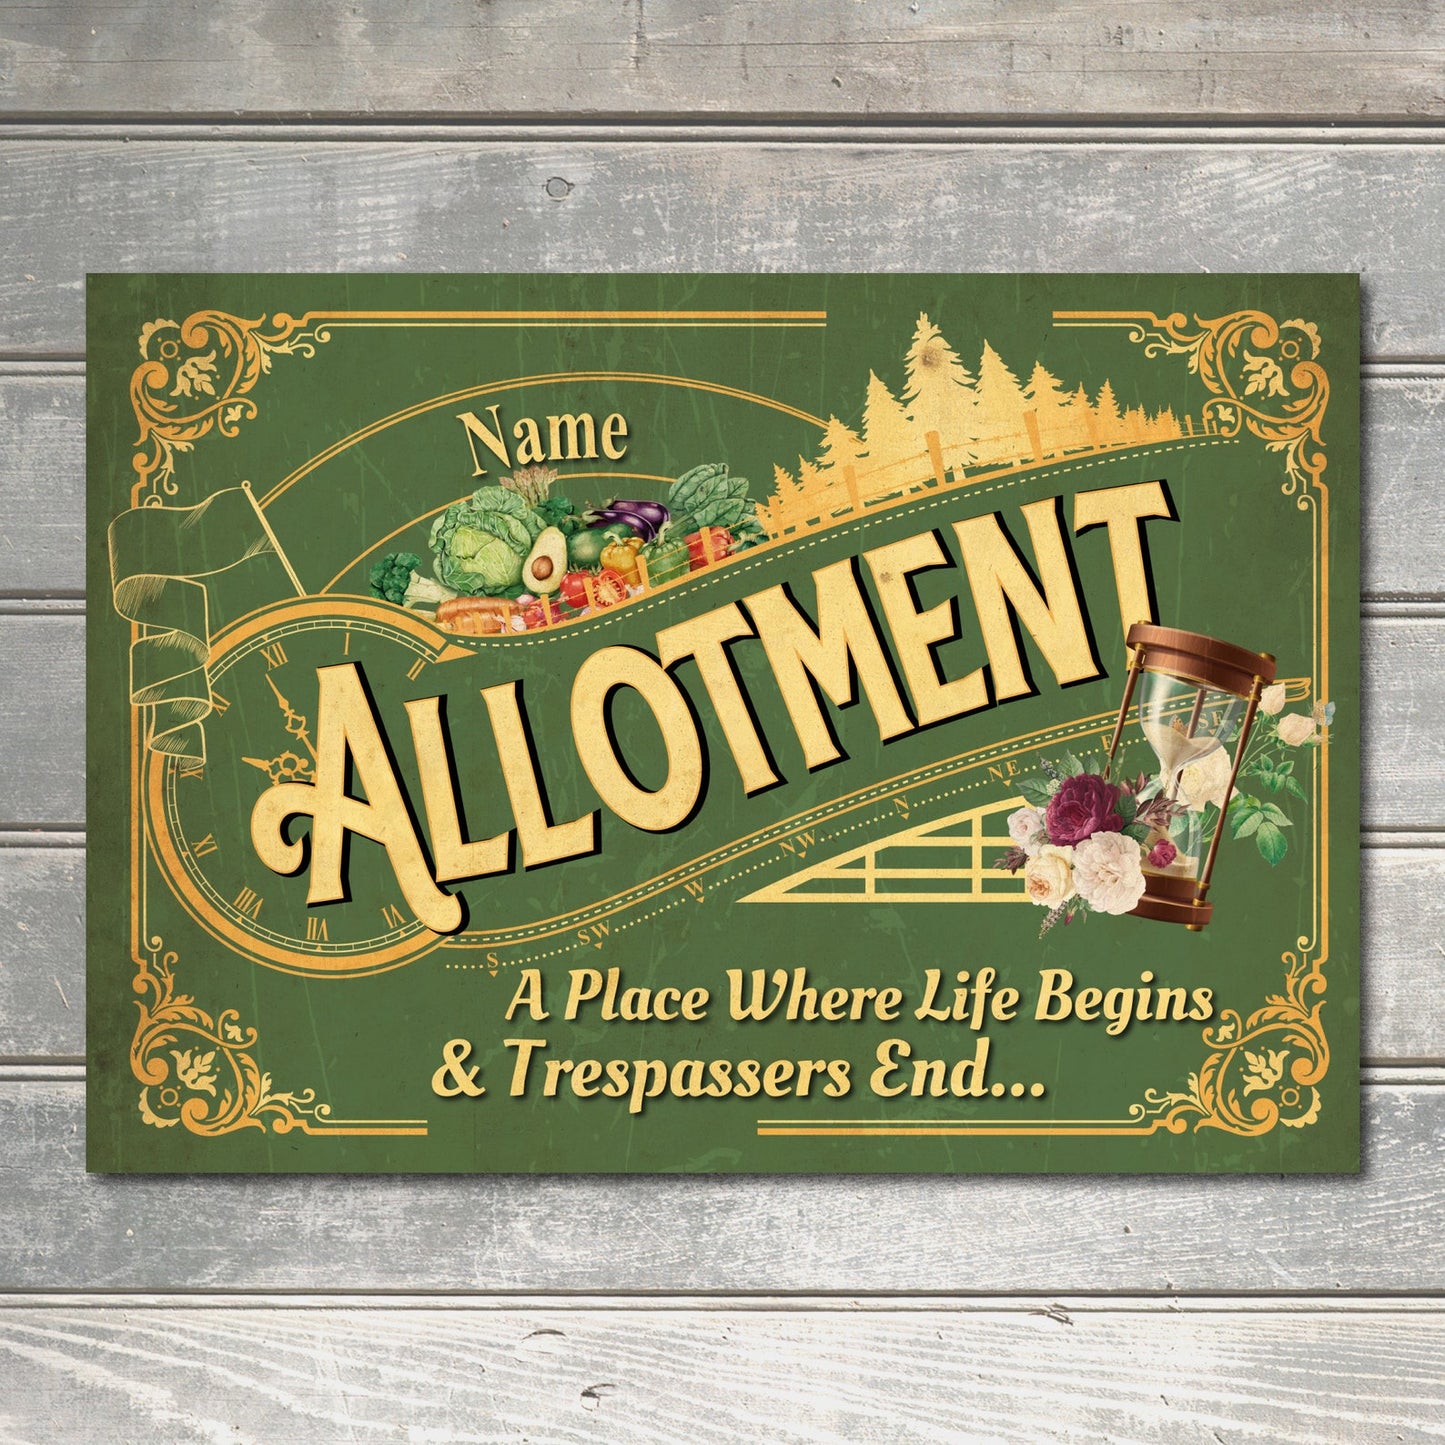 Personalised Allotment Sign Metal Garden Vegetable Patch Gold Yellow Purple Red Blue Green Rustic Effect Wall Door Decor Plaque 0254-B